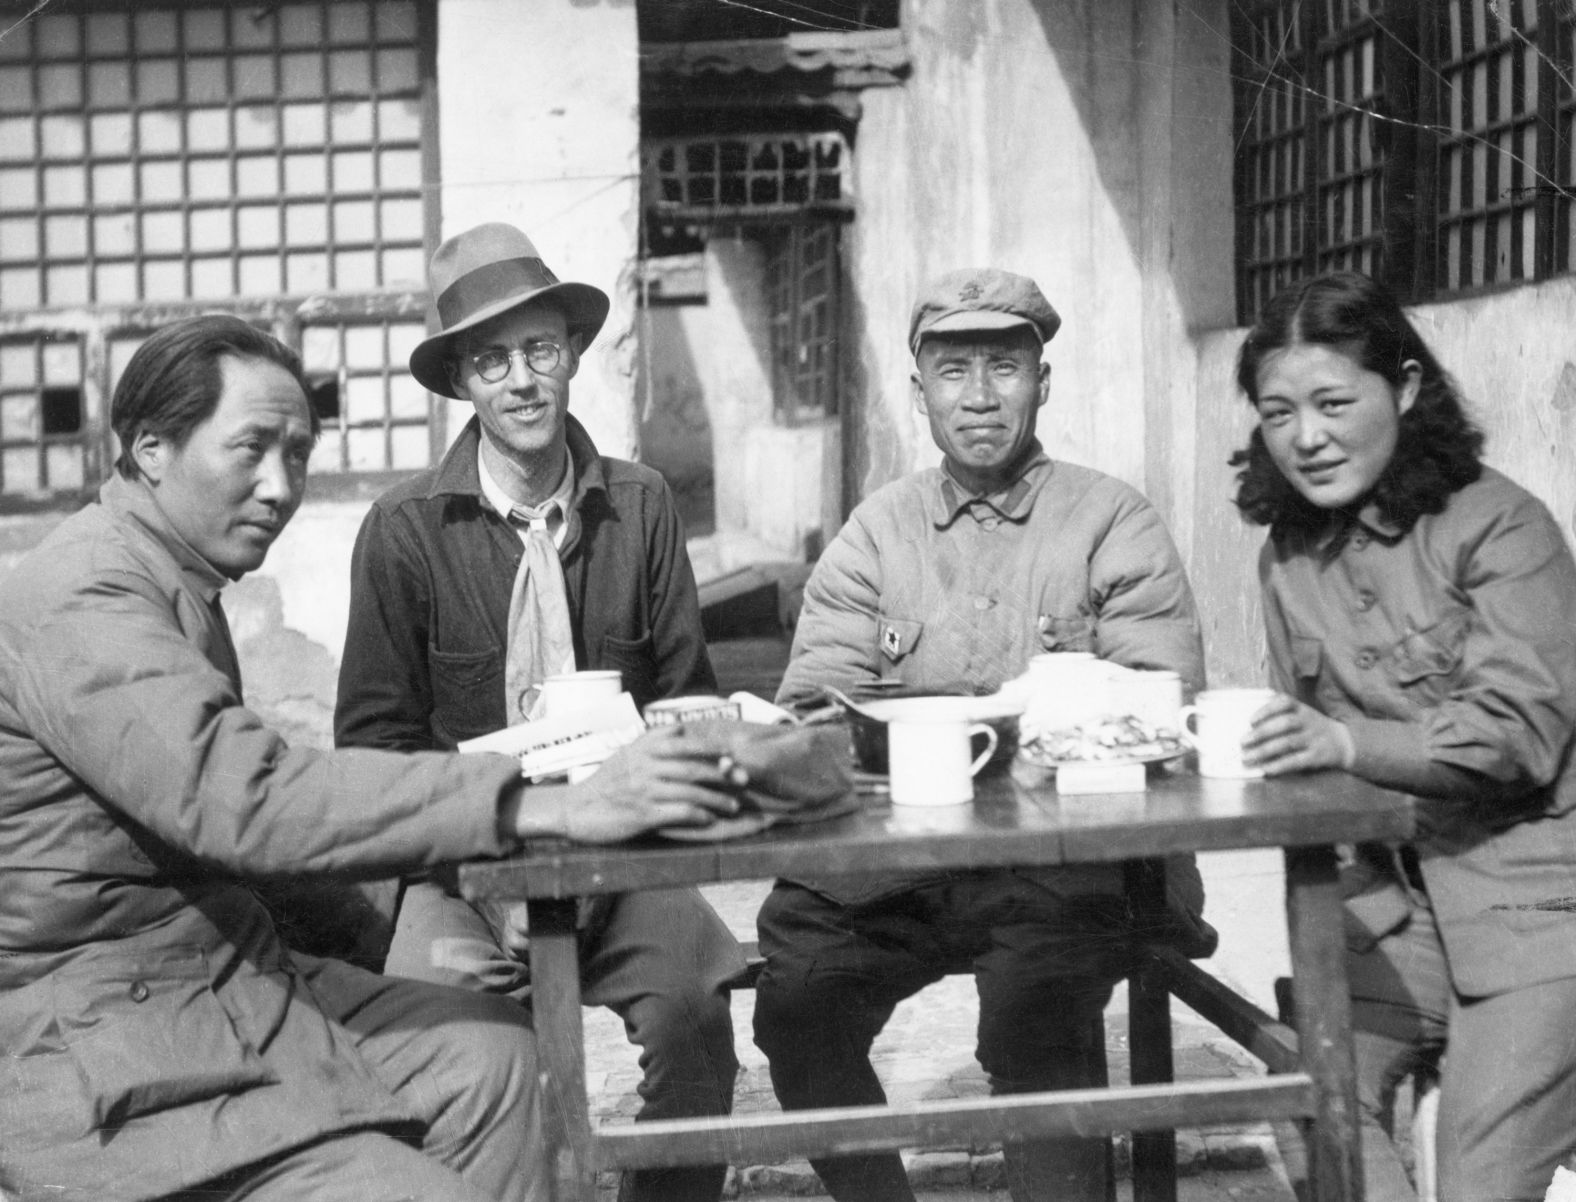 Mao Zedong, left, is seen at the Chinese Communist headquarters in Yan'an, in northern China, in the 1930s. Mao rose from the peasant class to become the pre-eminent revolutionary theorist, political leader and statesman of communist China. Pictured with him here, from left, are United Press correspondent Earl Leaf, military leader Chu Teh and Mao's second wife, He Zizhen.